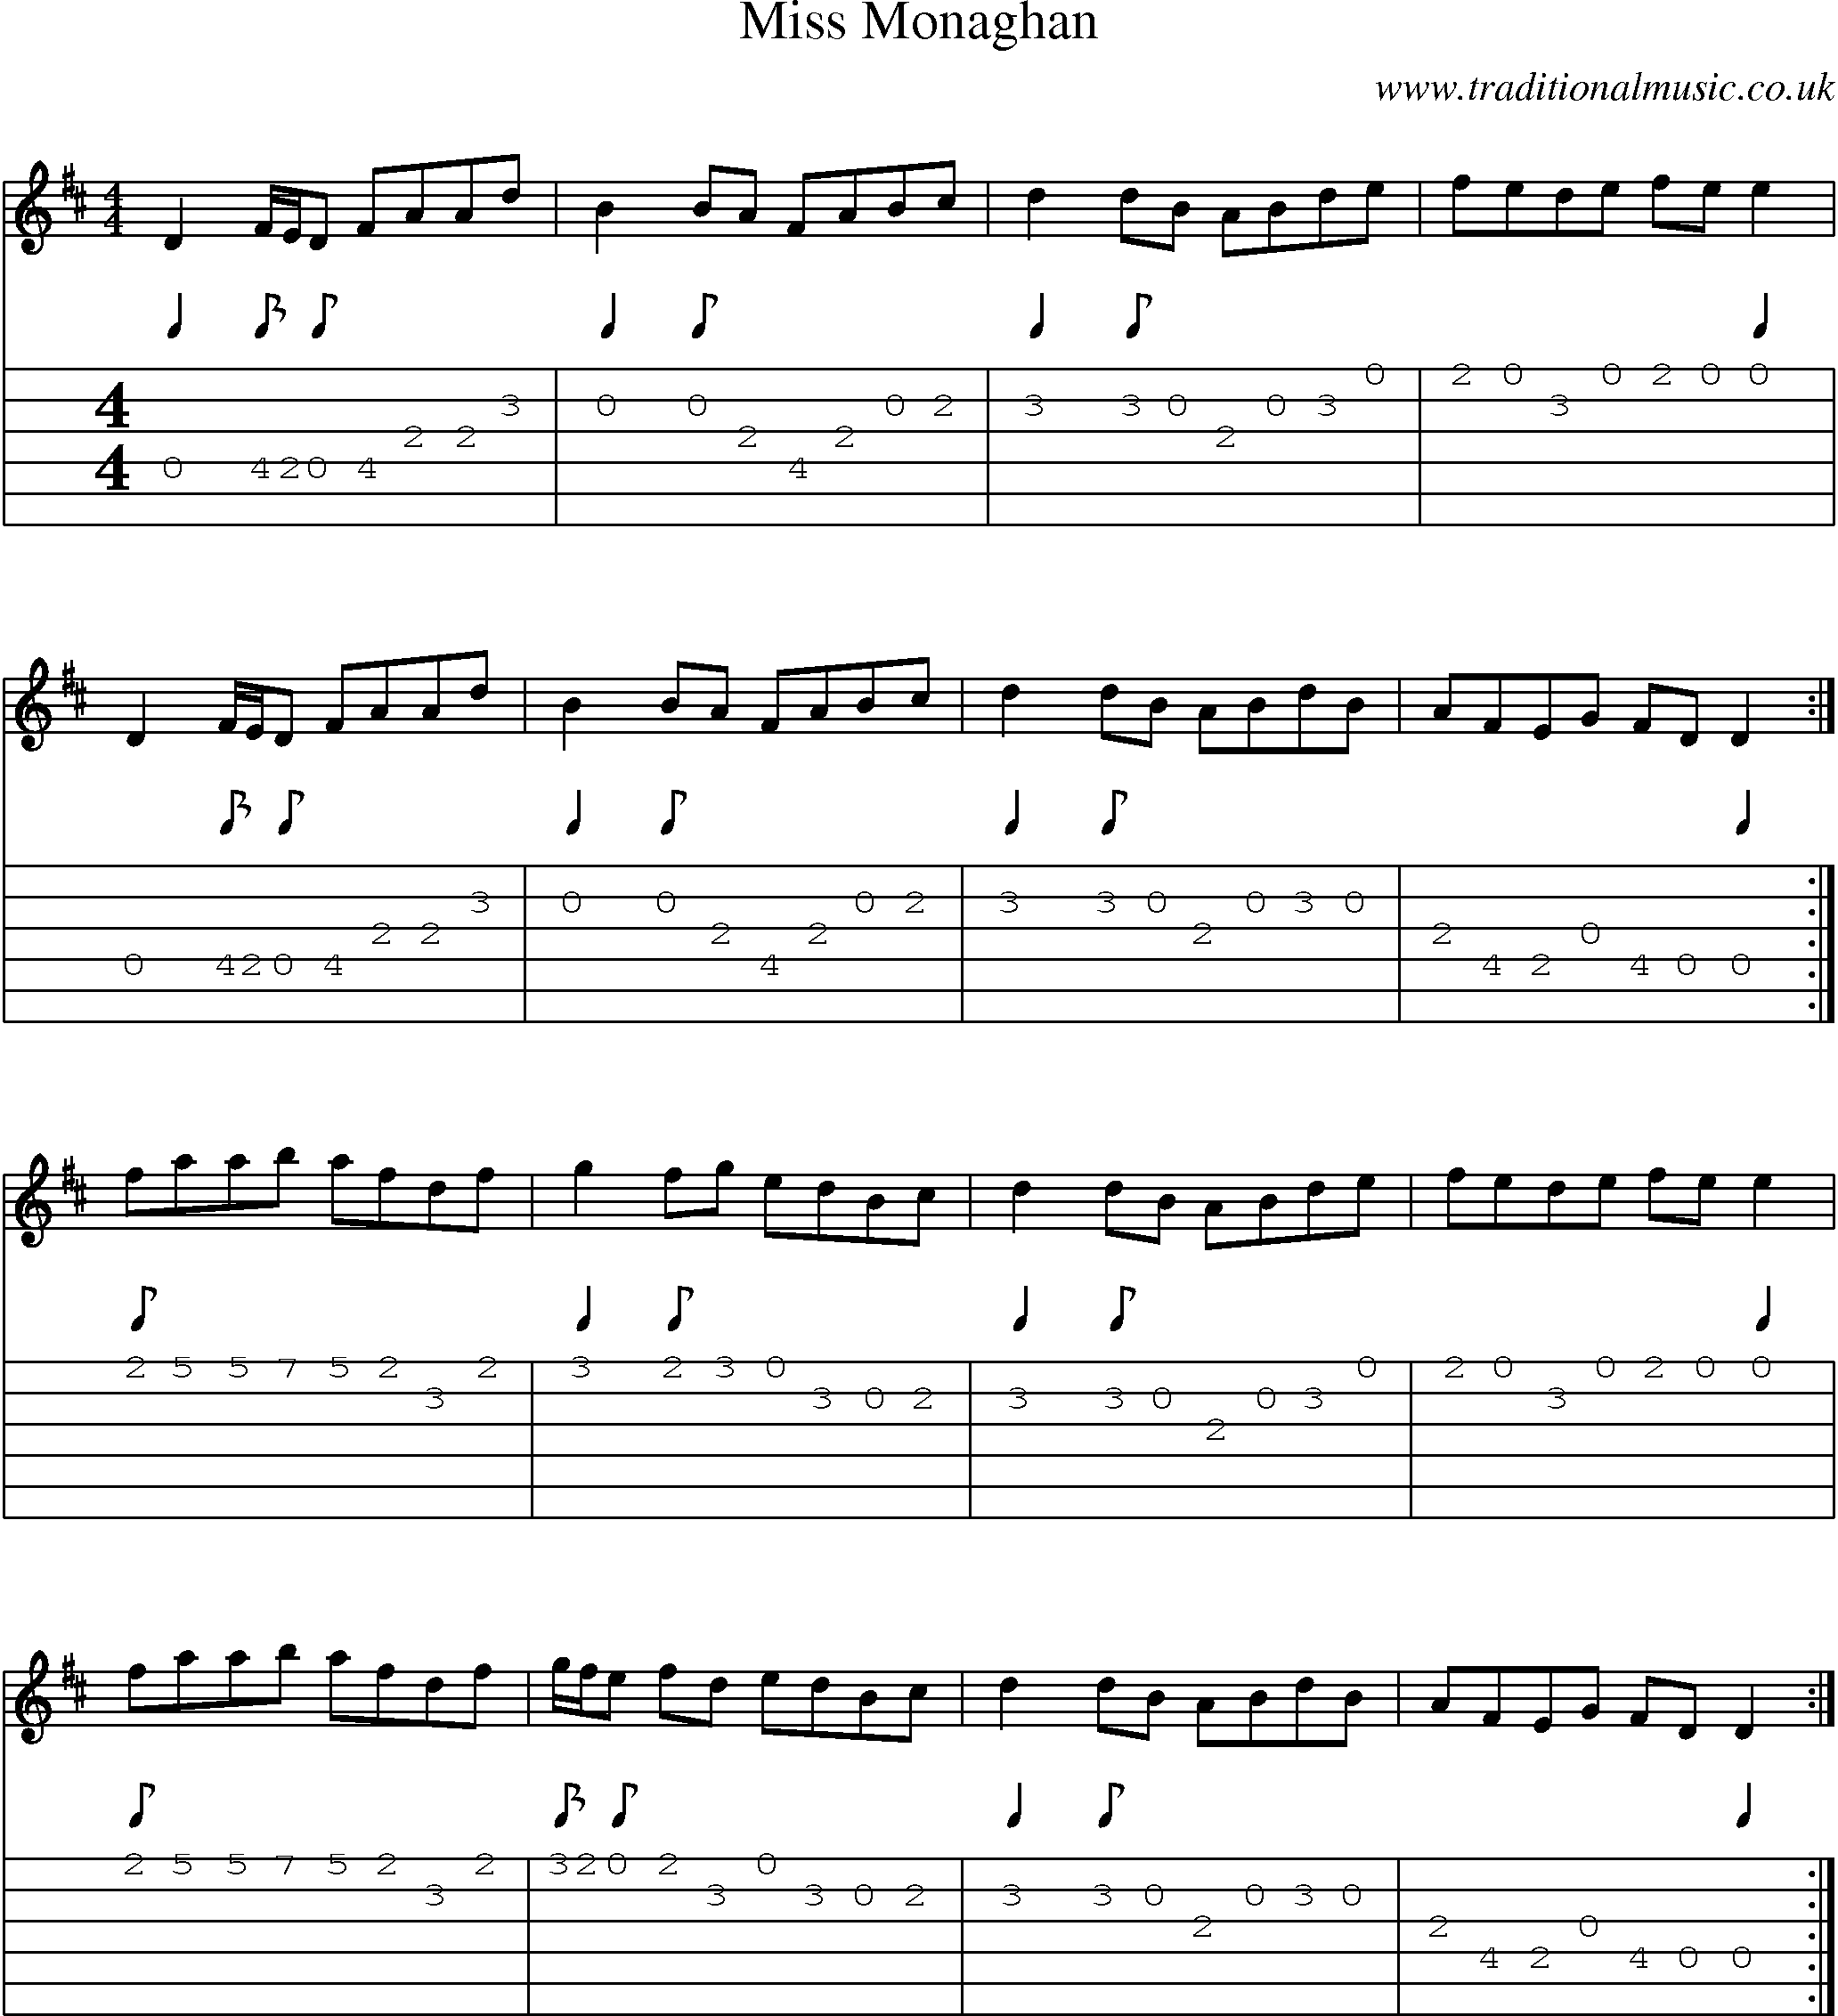 Music Score and Guitar Tabs for Miss Monaghan